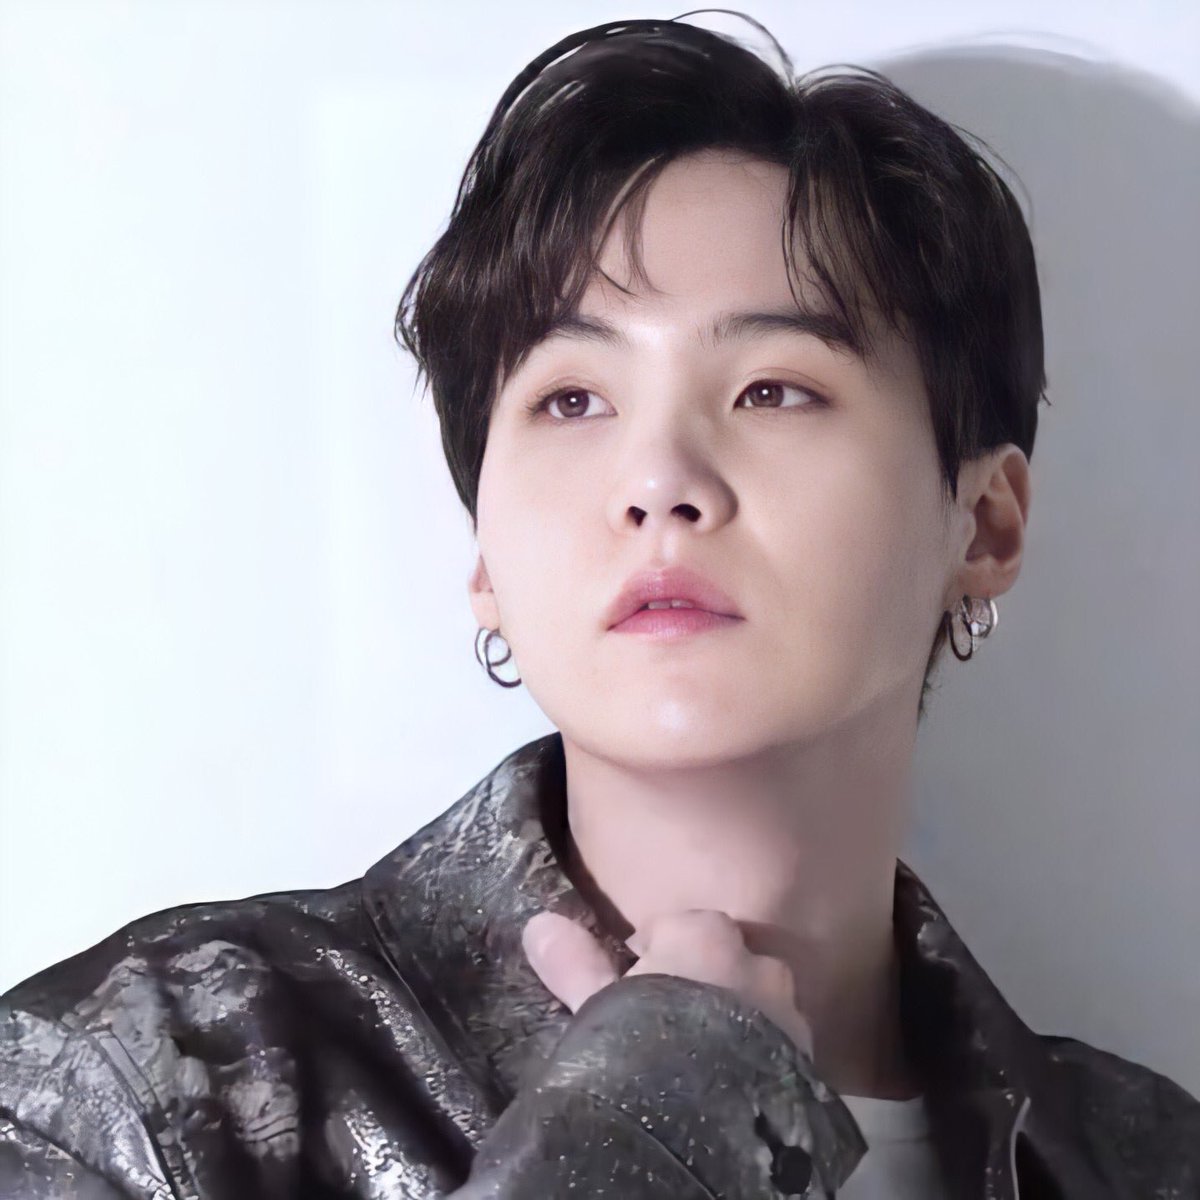 Yoongi being the prettiest human being - a very long blessing thread